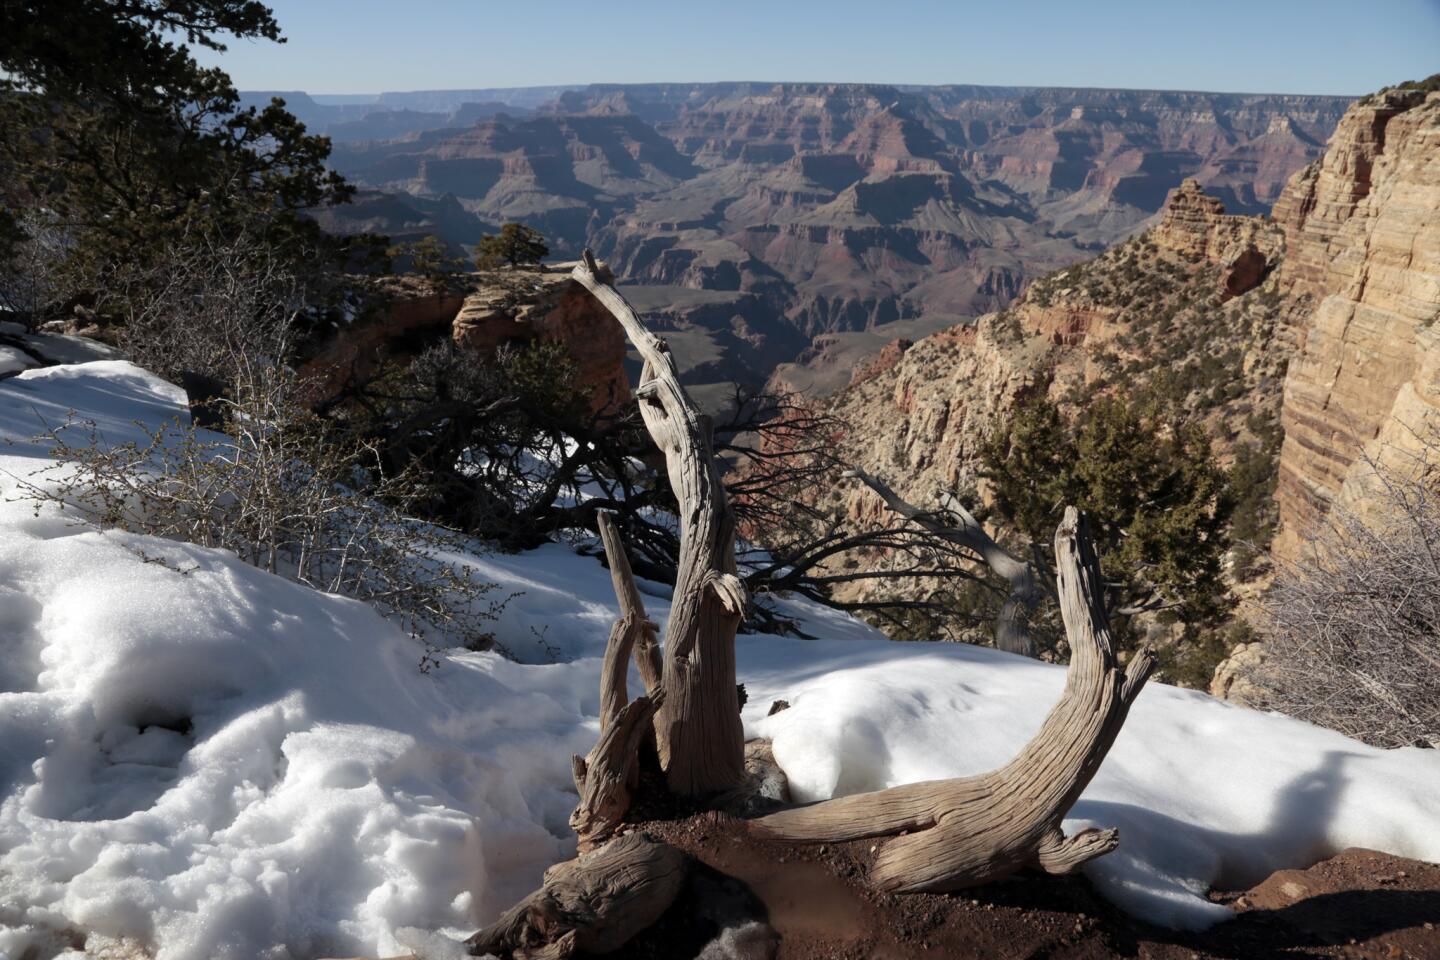 Snow and ice still cover areas near the South Kaibab Trail in the Grand Canyon on March 10, 2015.